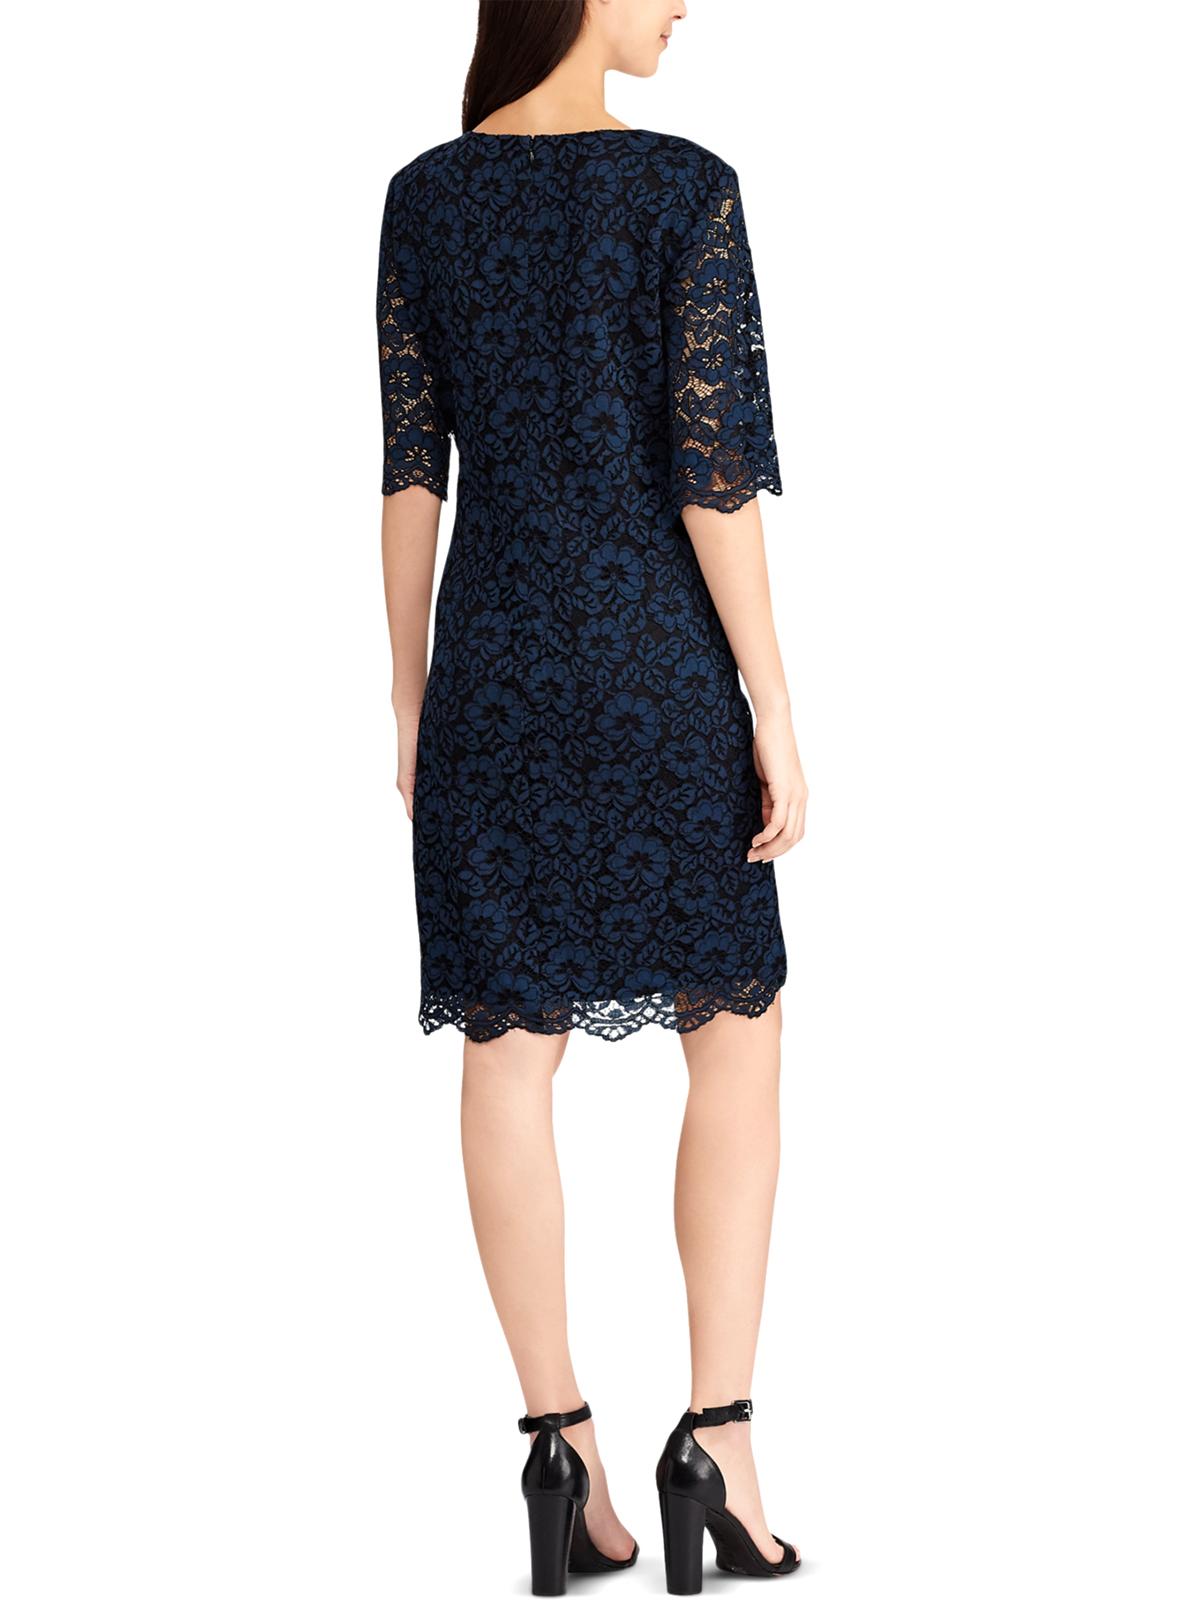 American Living Womens Floral Lace Dress